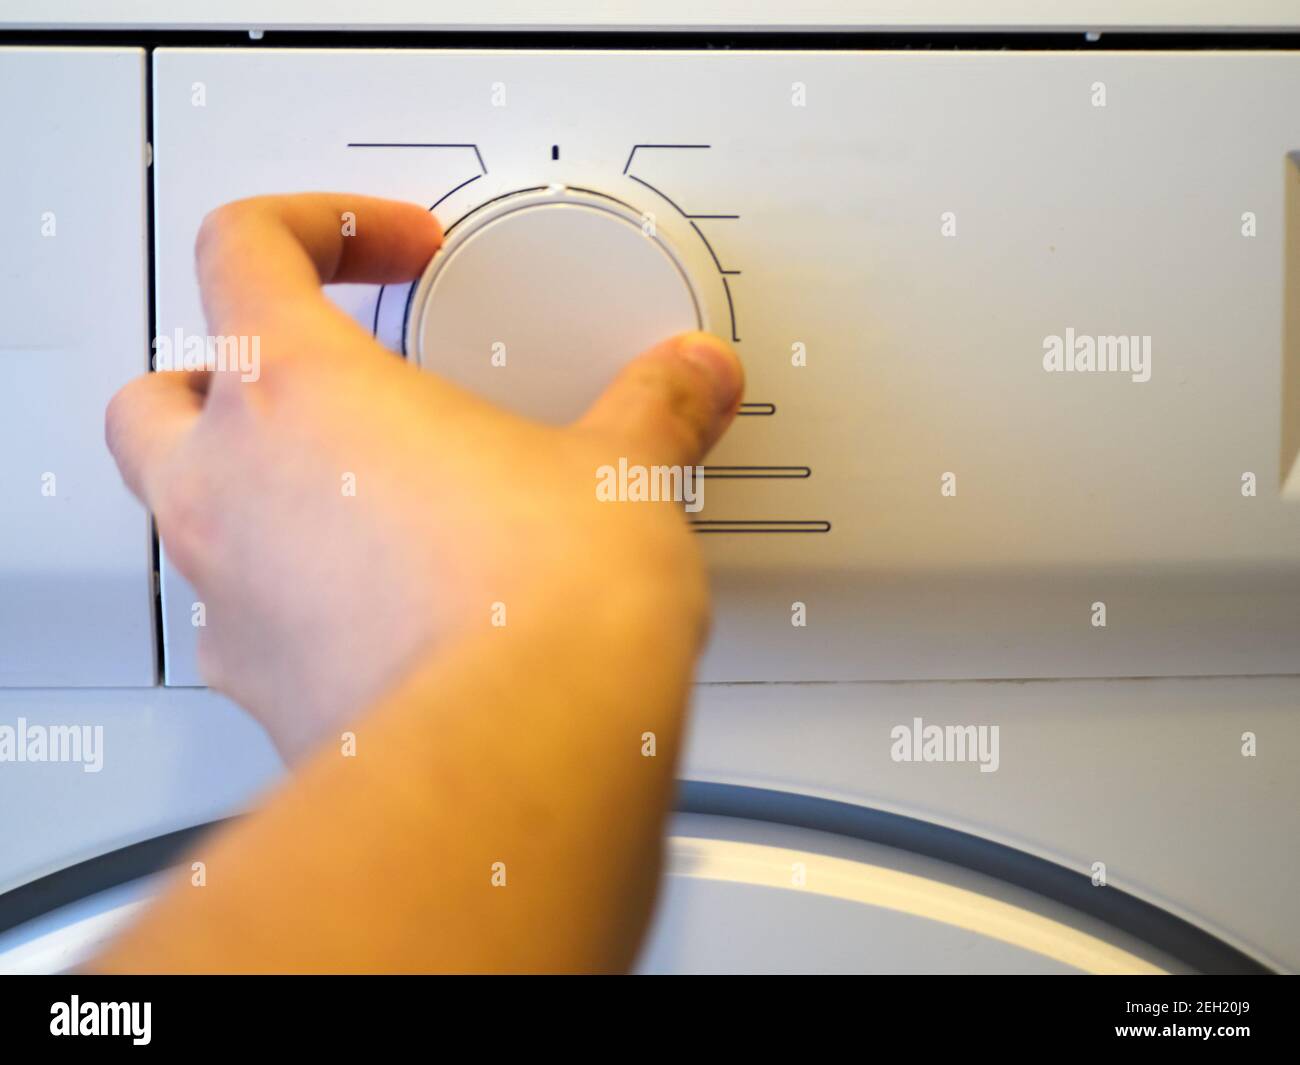 Mode selector for washing machine, tumble dryer. Without words. Hand selecting a mode. White washing machine. Concept, modern. Horizontal view. Stock Photo